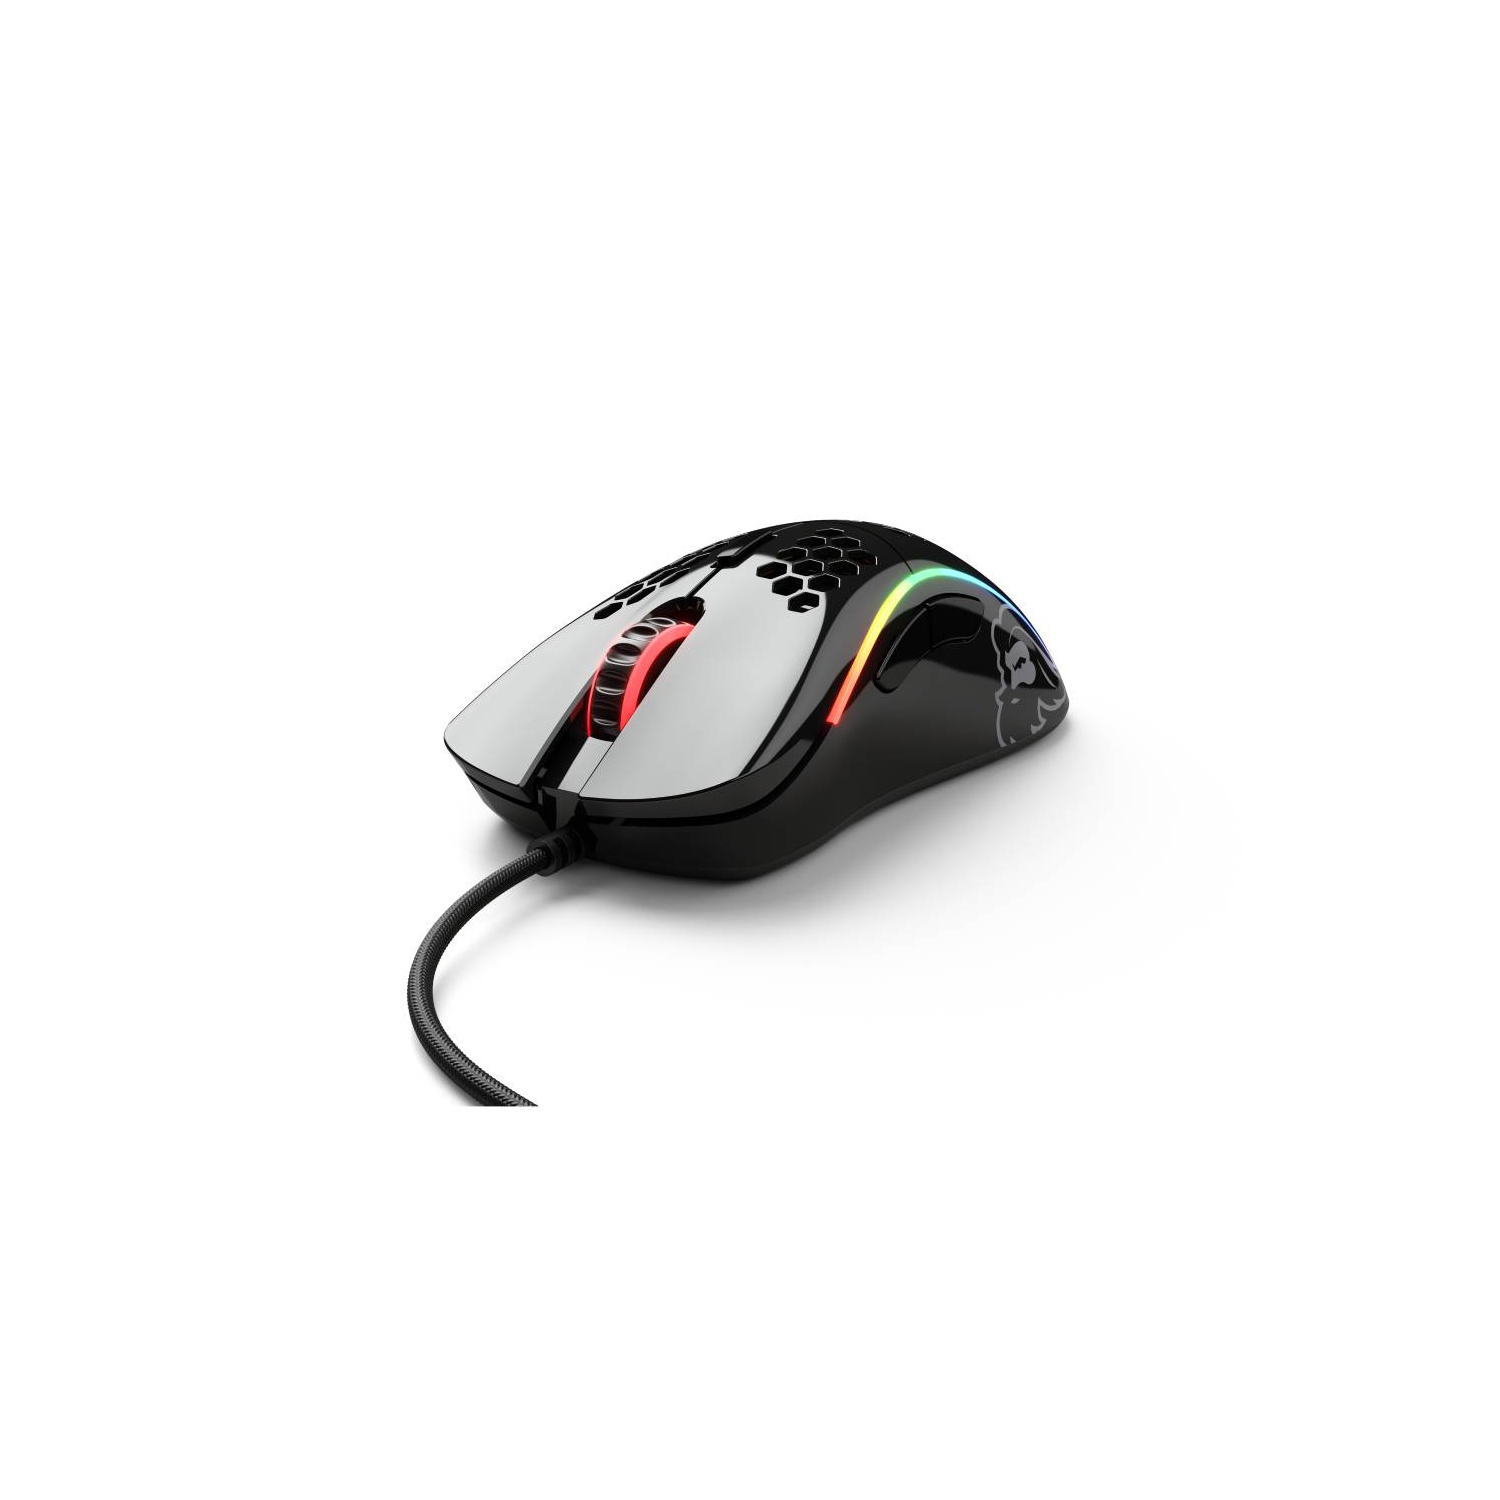 Glorious Gaming Mouse Model D - Glossy Black